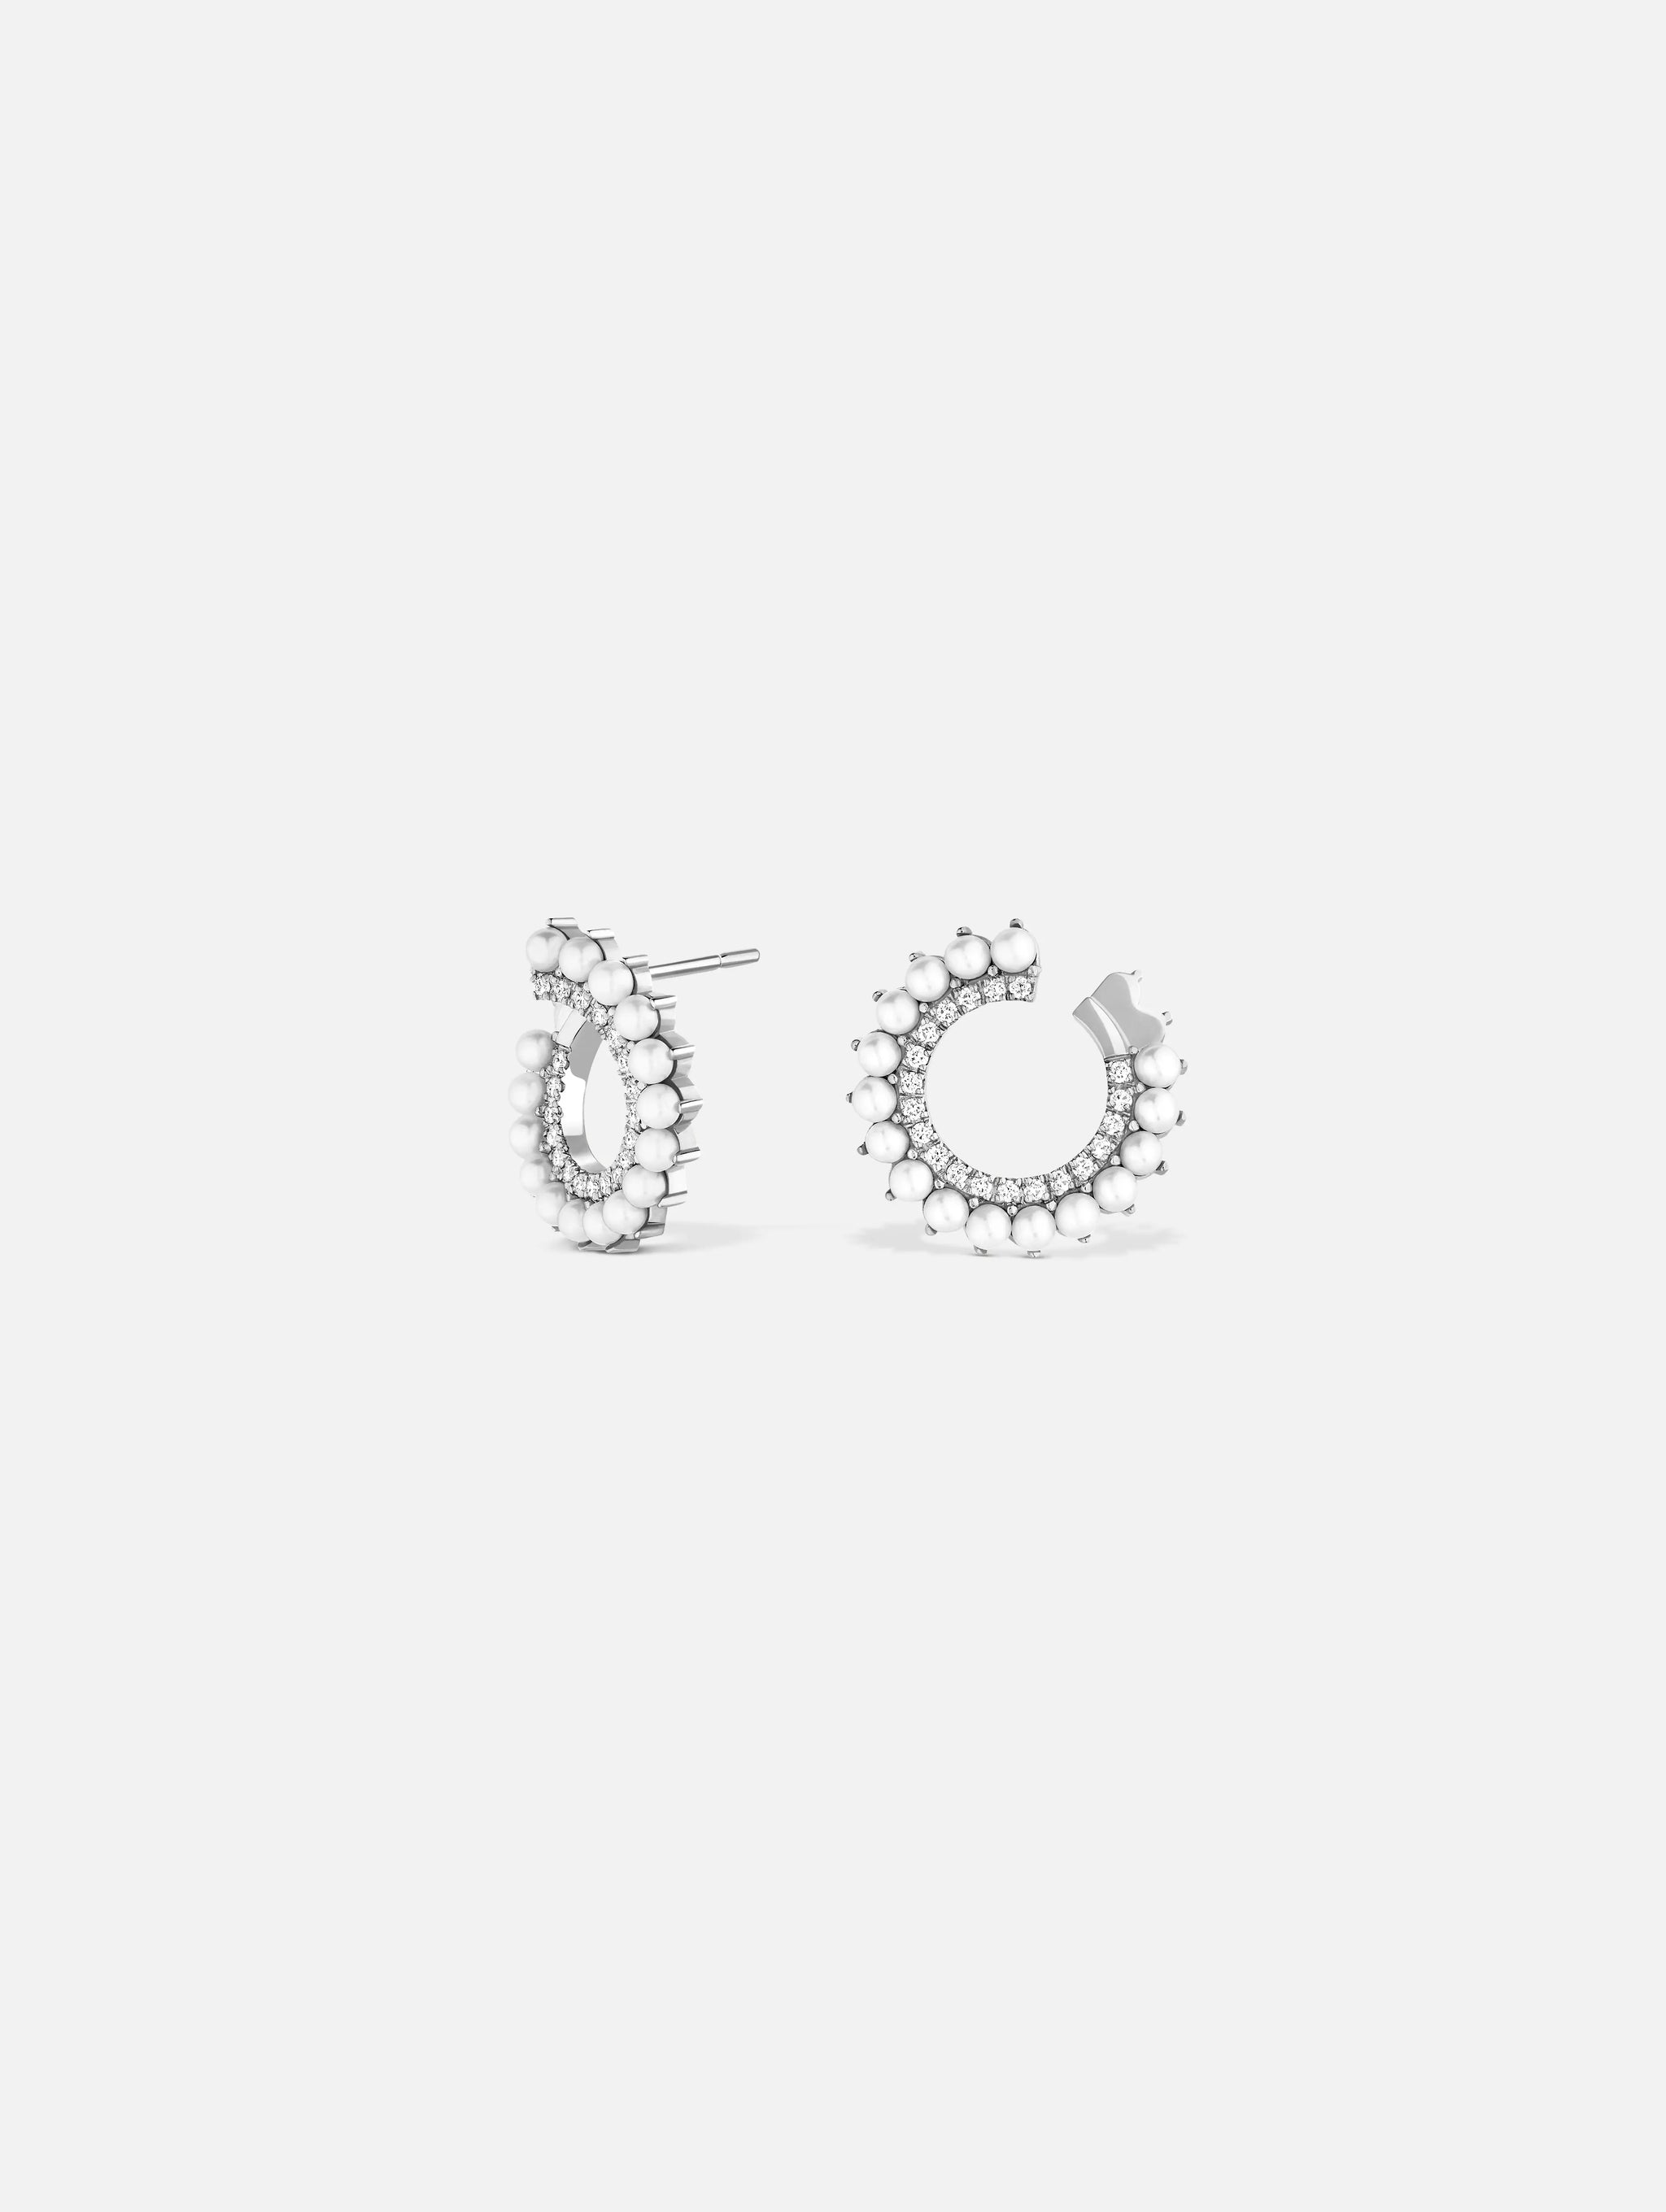 Pearl Earrings in White Gold - 1 - Nouvel Heritage